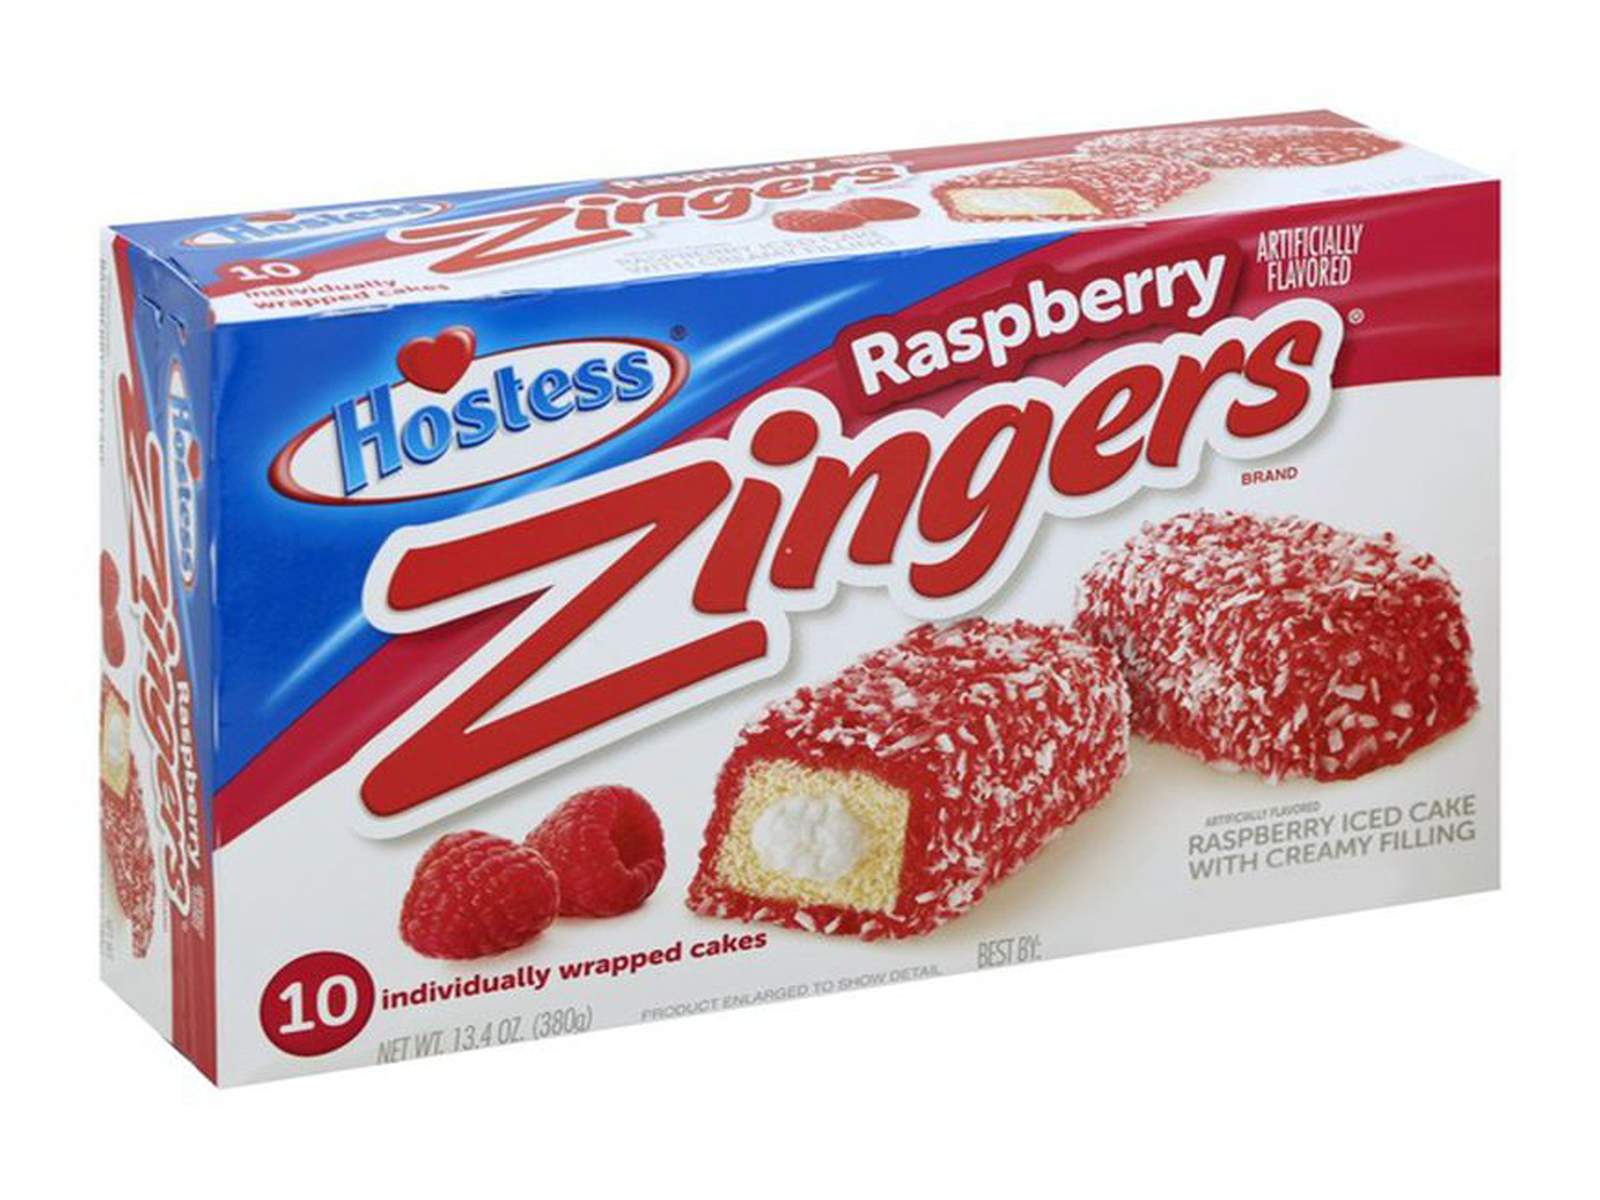 Hostess recalls Raspberry Zingers due to potential for mold